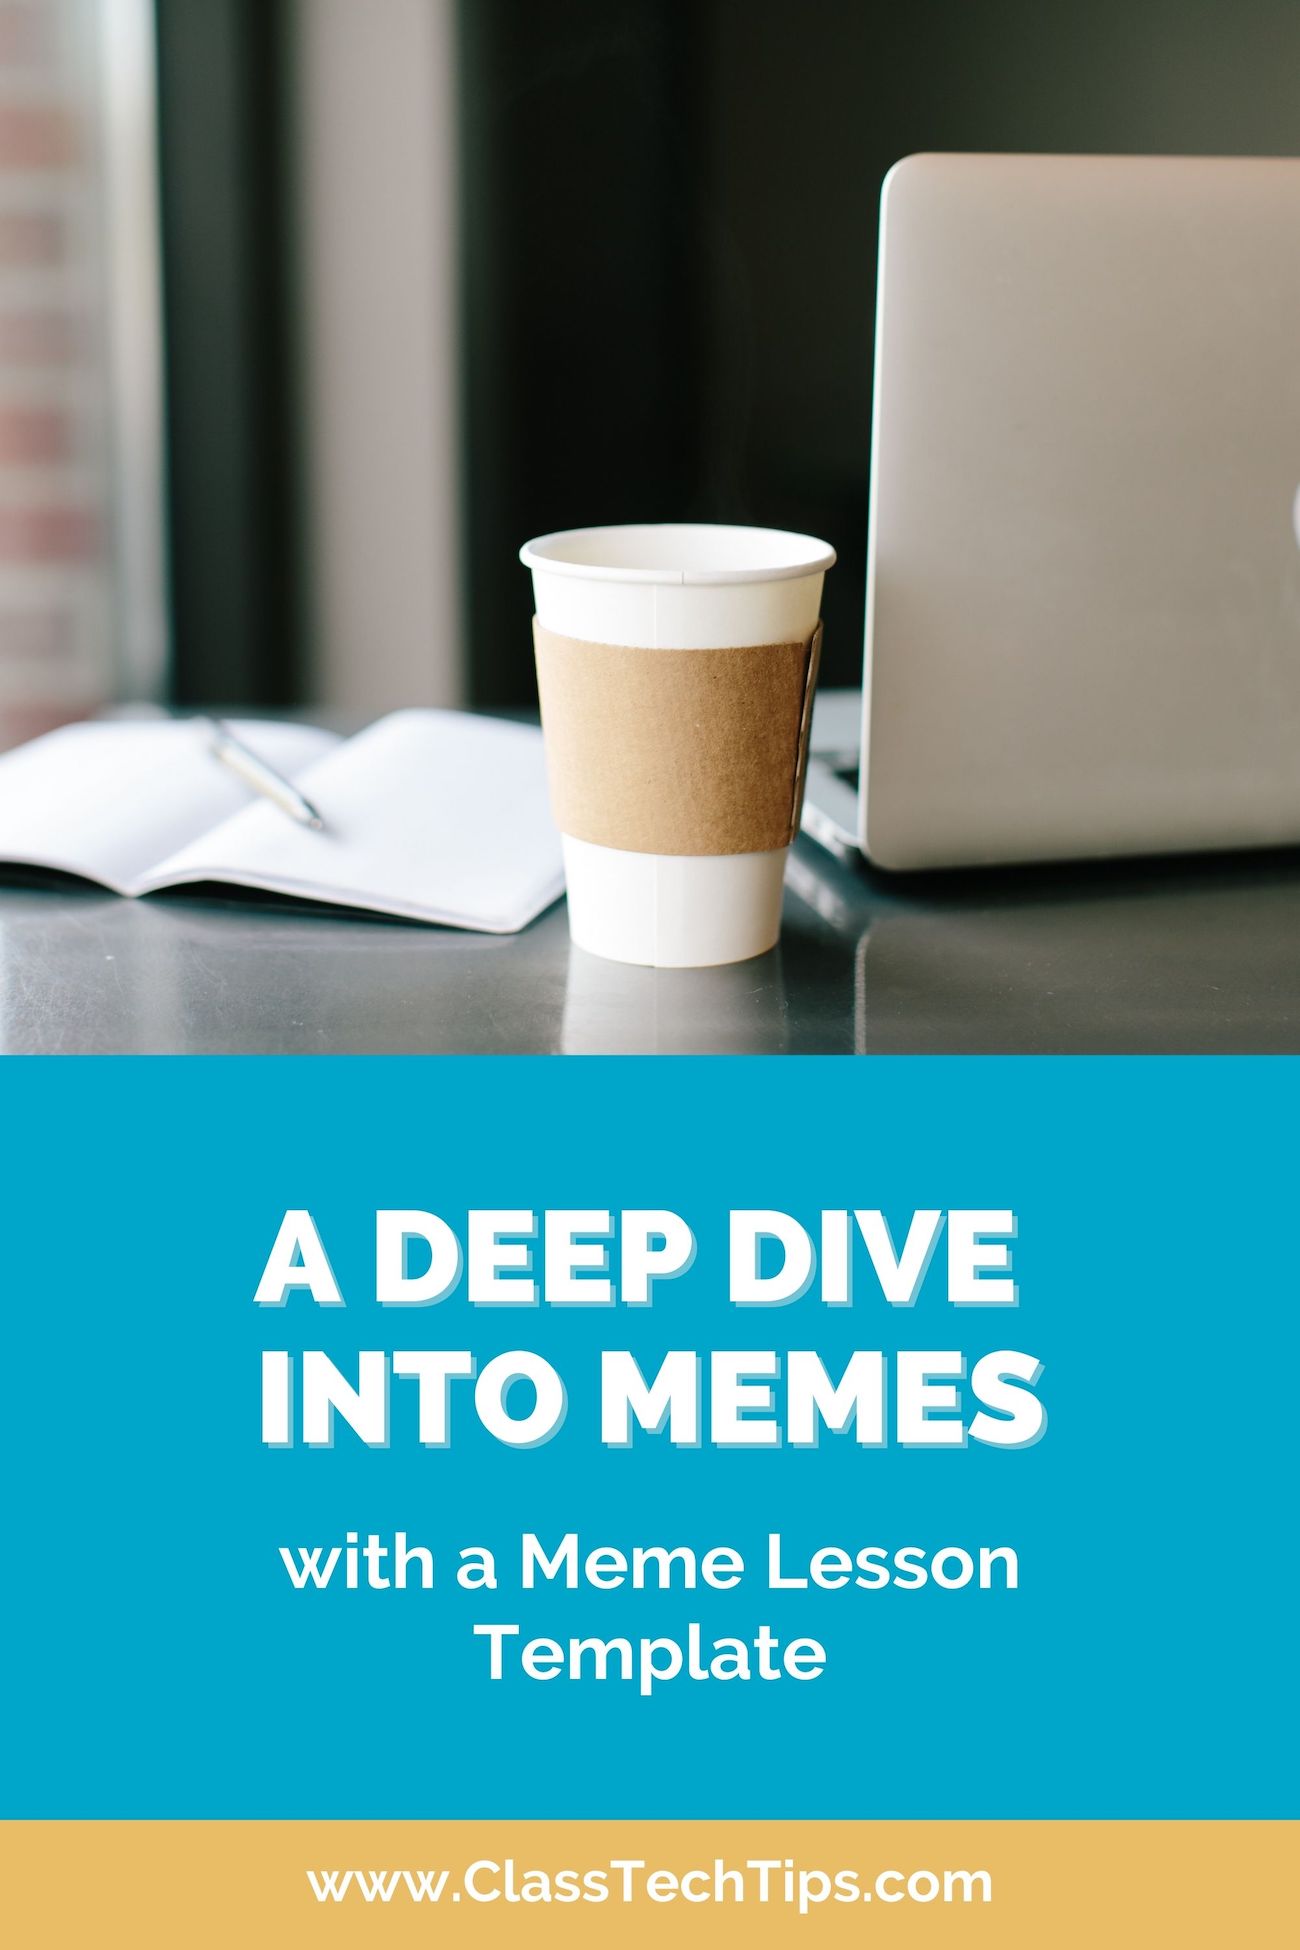 We'll take a deep dive into using memes in the classroom, and I'll share a student-friendly activity idea along with a meme lesson template.